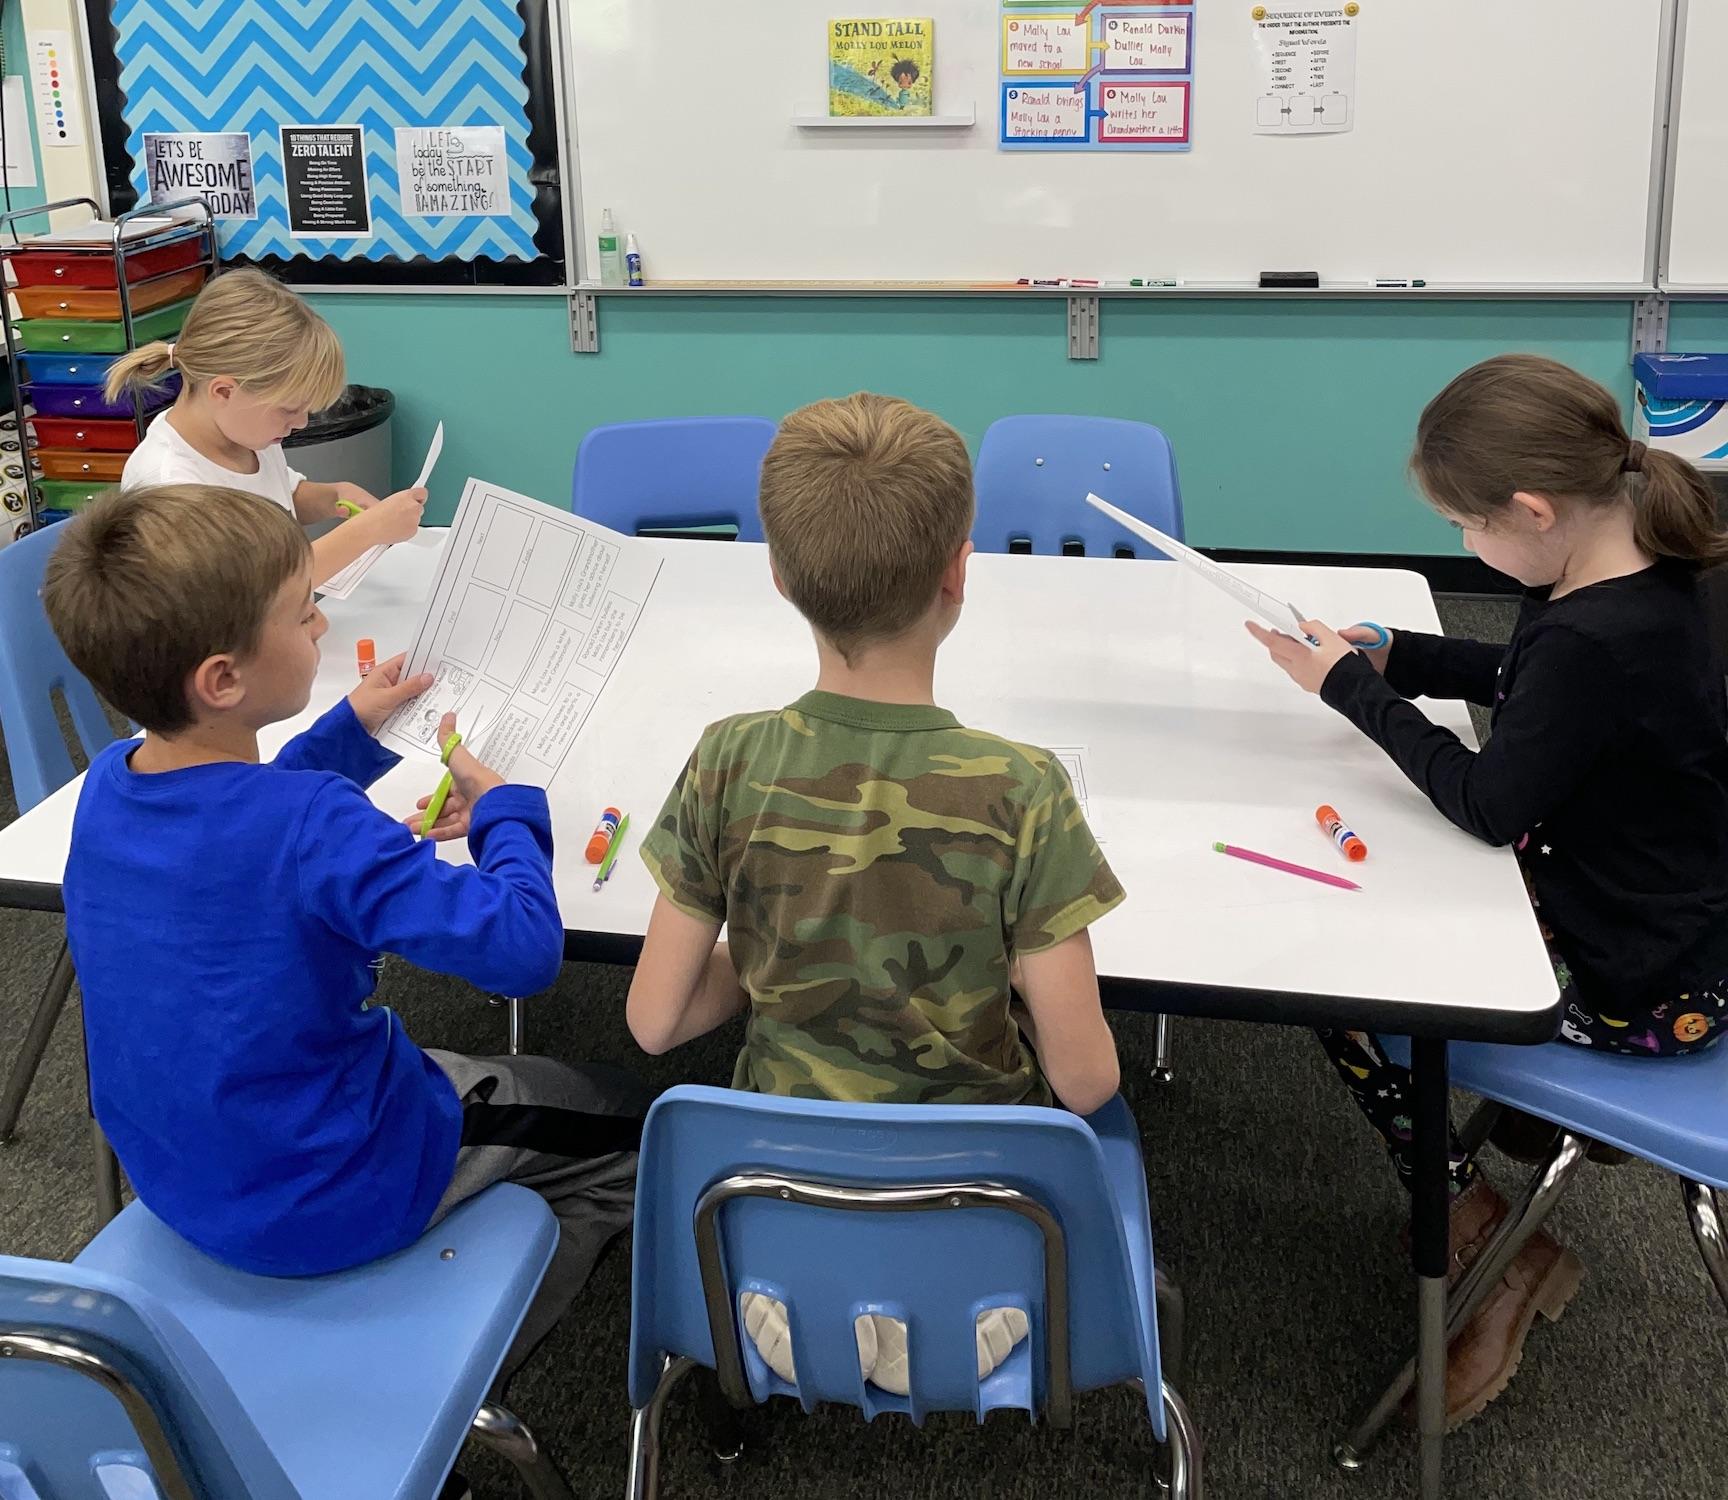 Students work in a group to accomplish the assignment